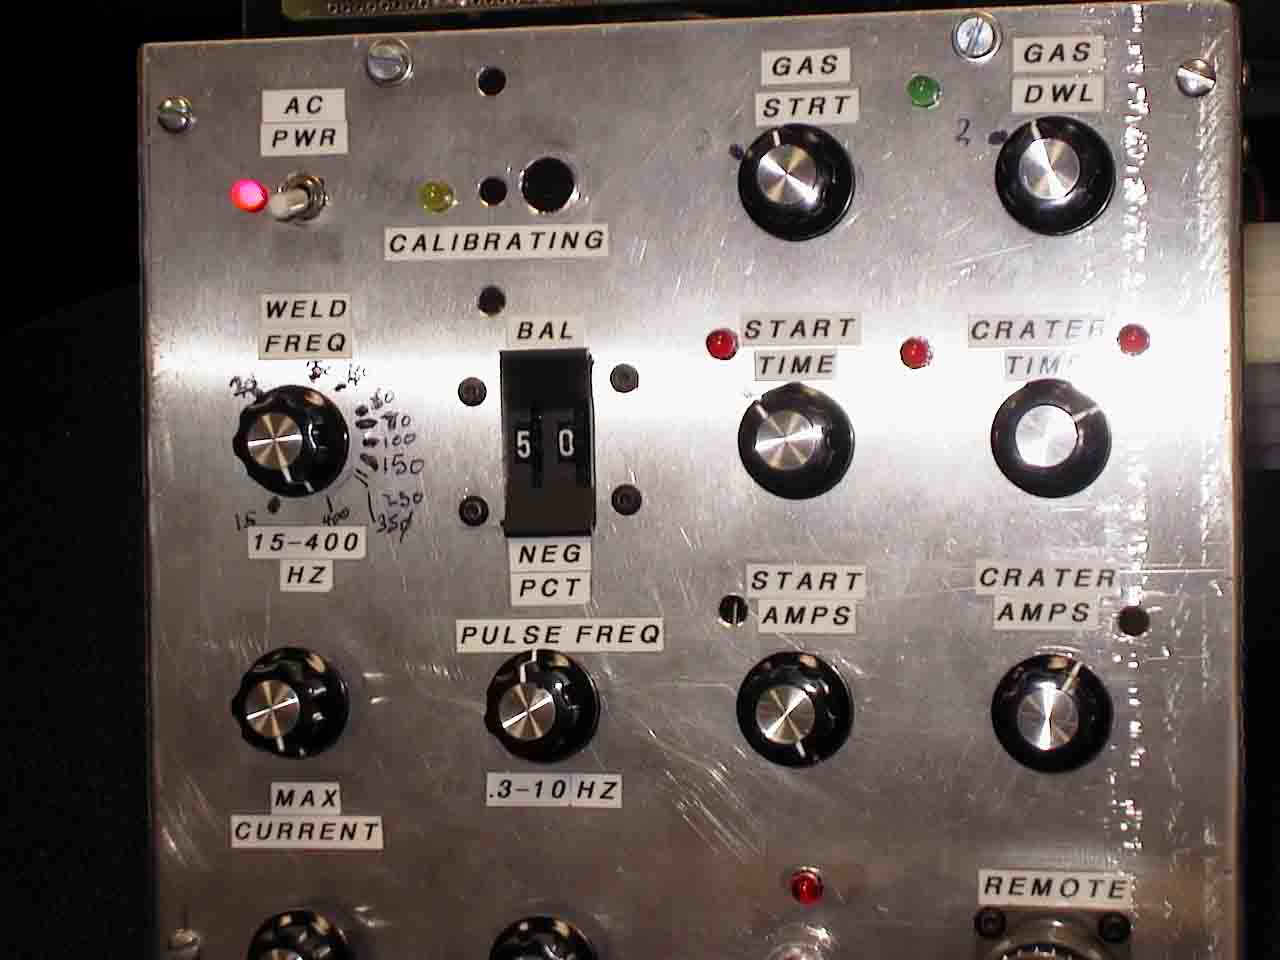 Top close-up of Front panel